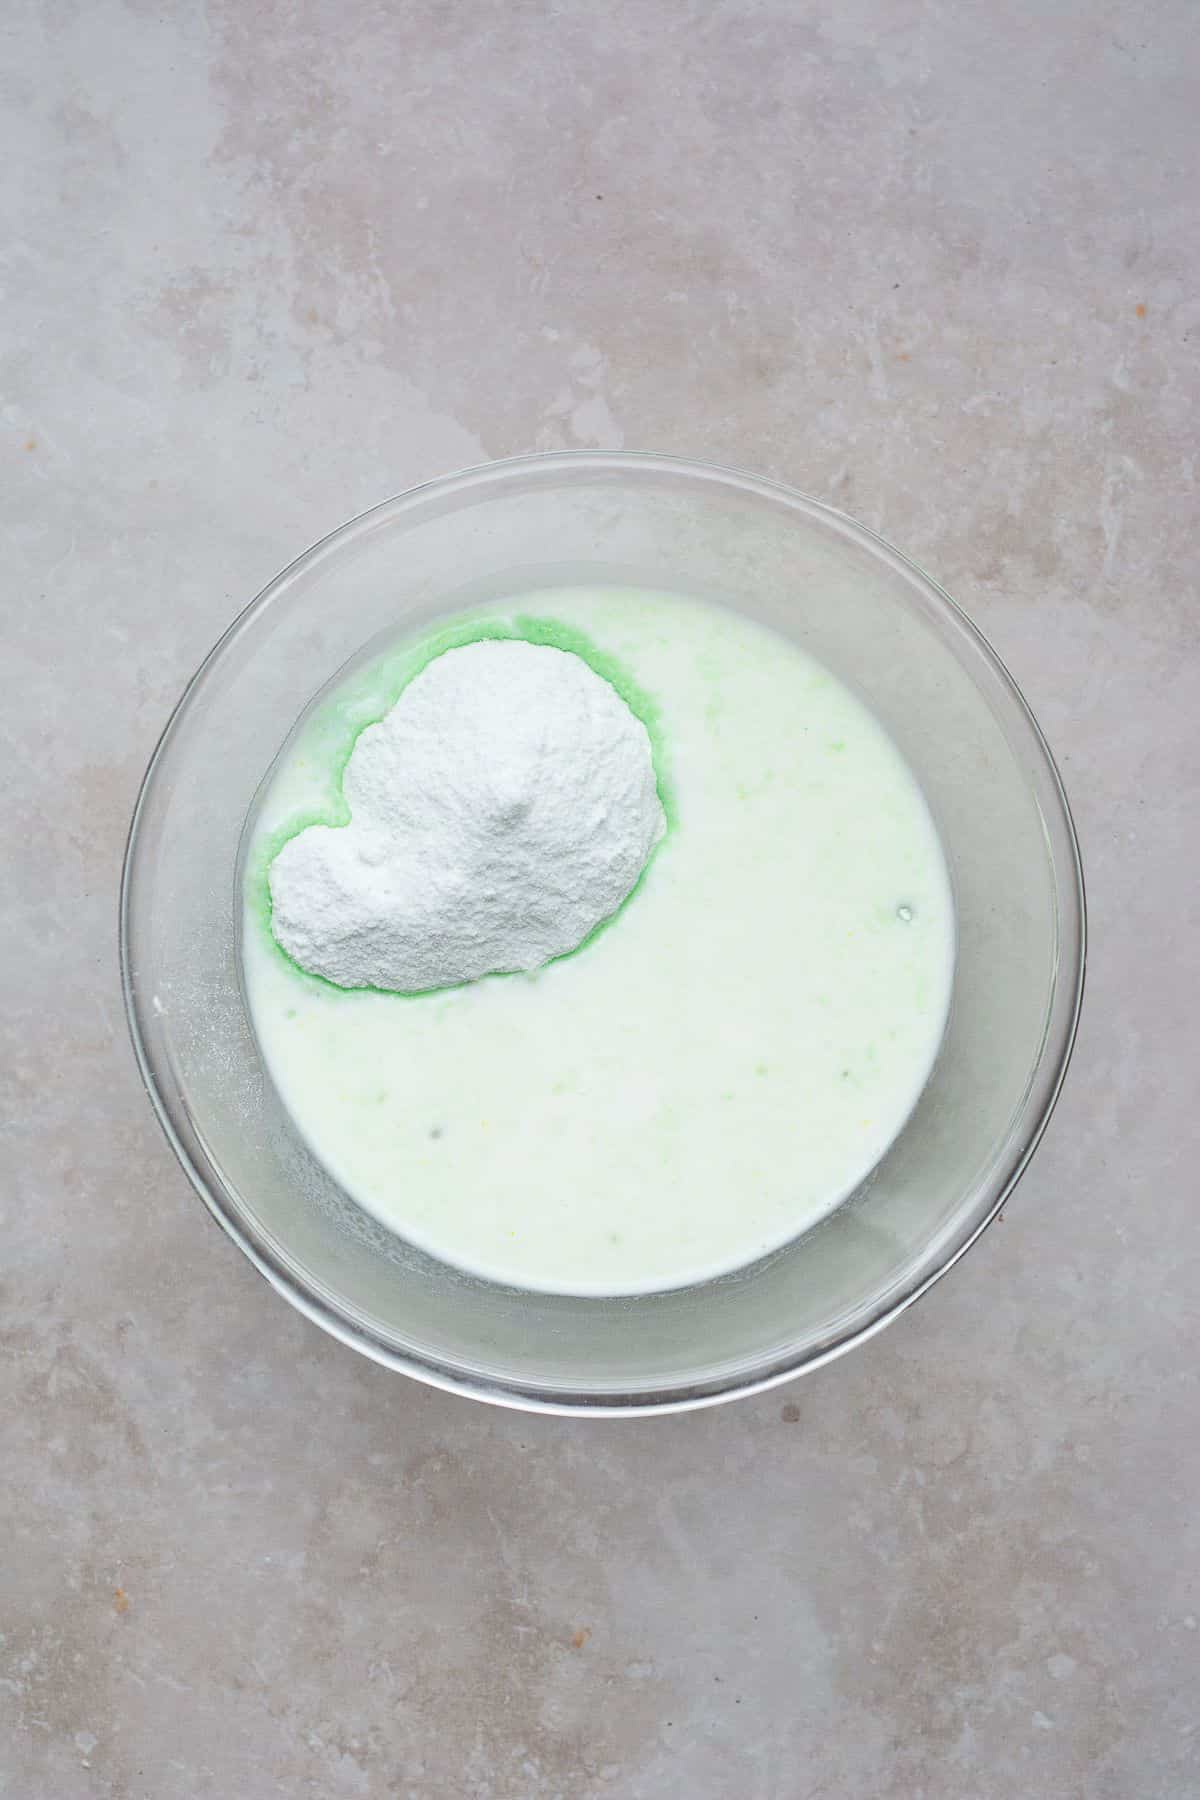 Mixing milk and pistachio pudding in a bowl.